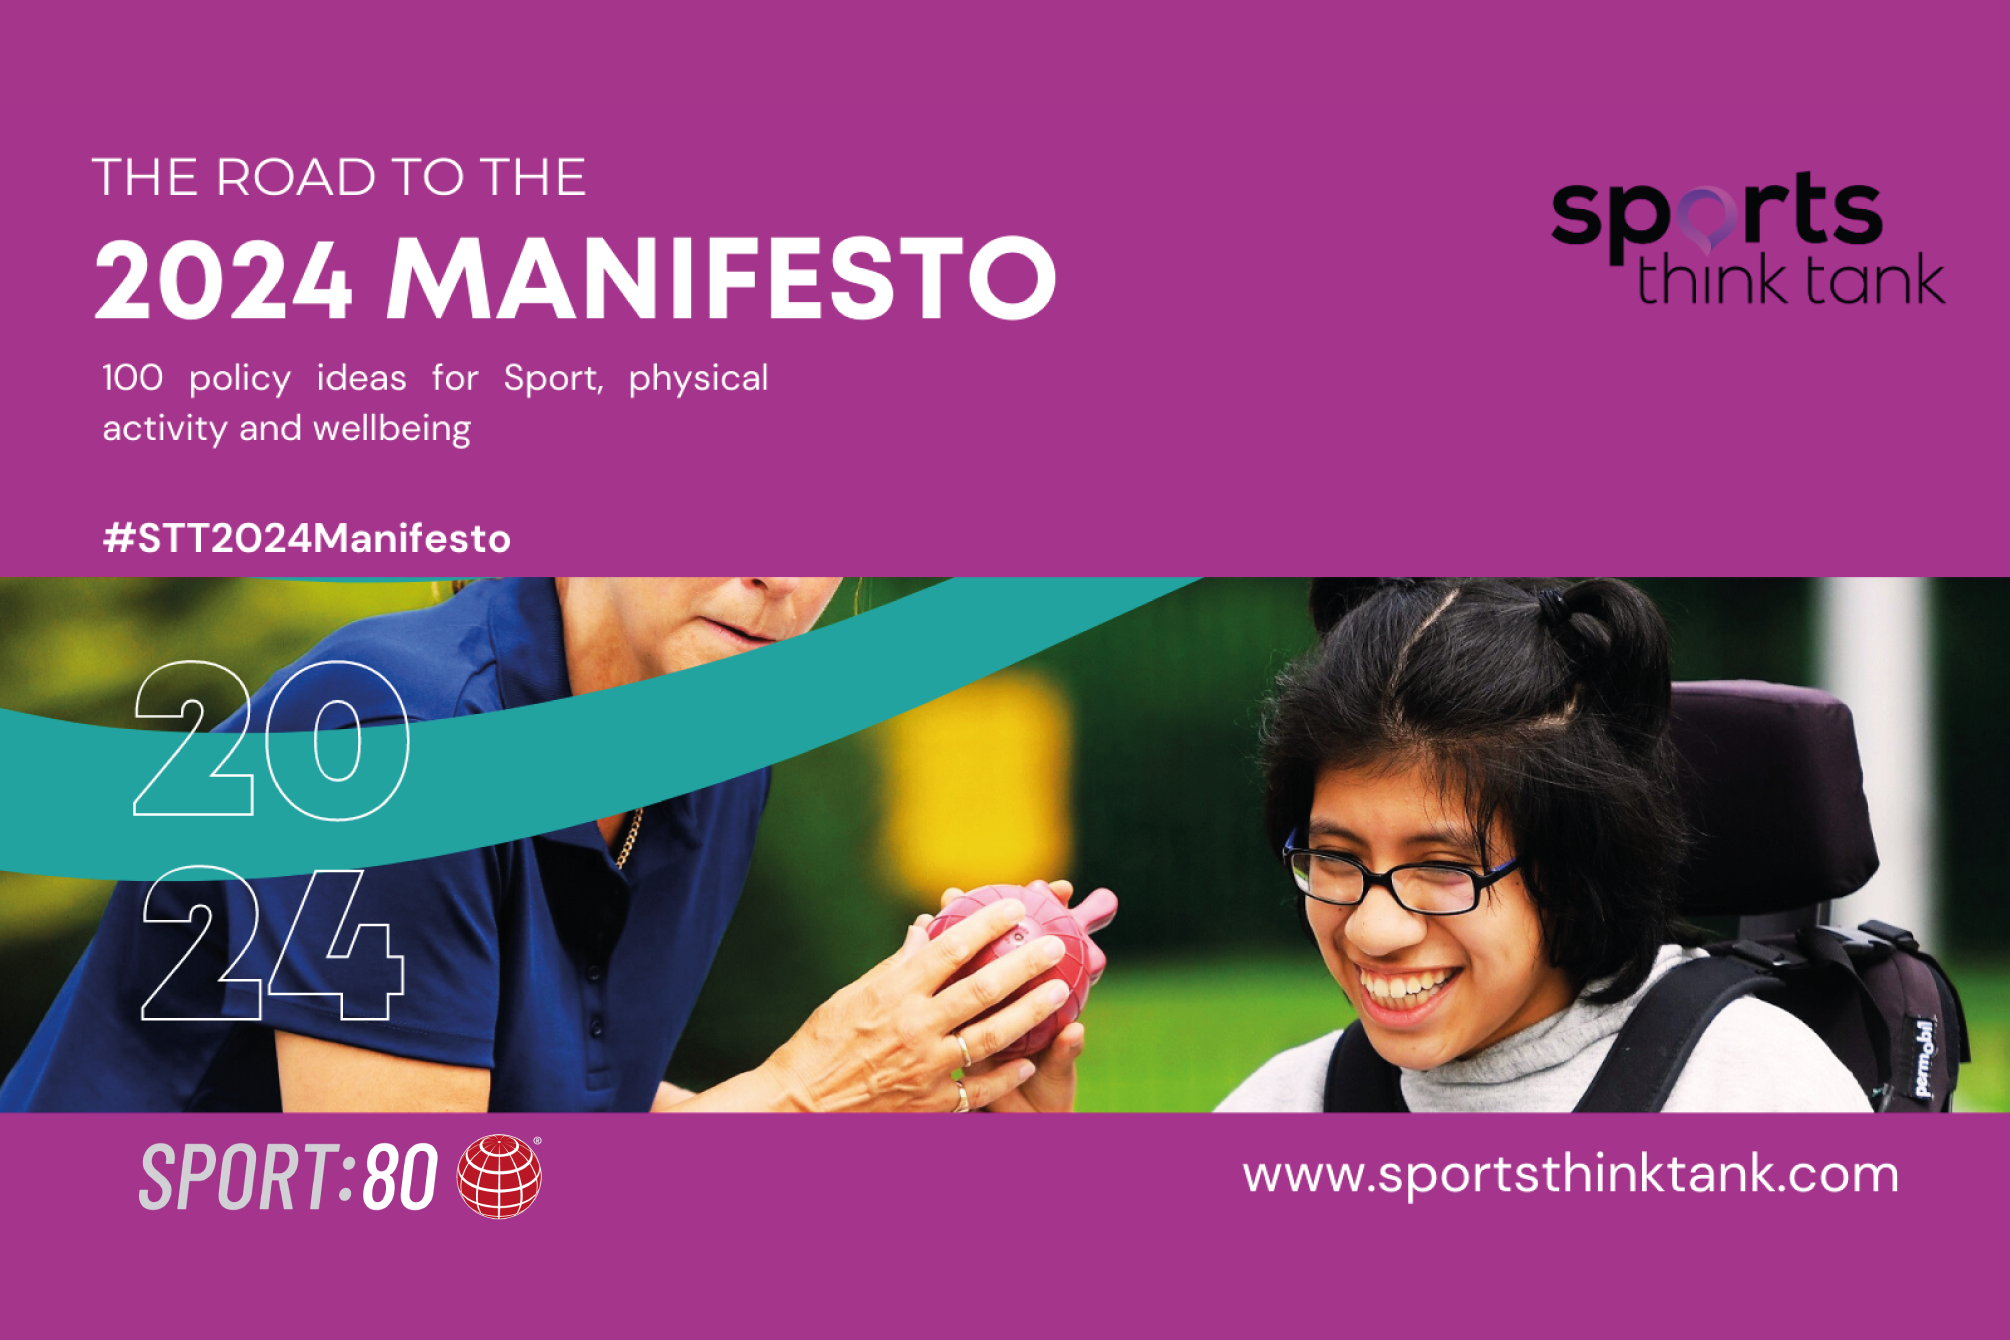 Sport:80 published in ‘The Road to the 2024 Election Manifesto’ by Sports Think Tank